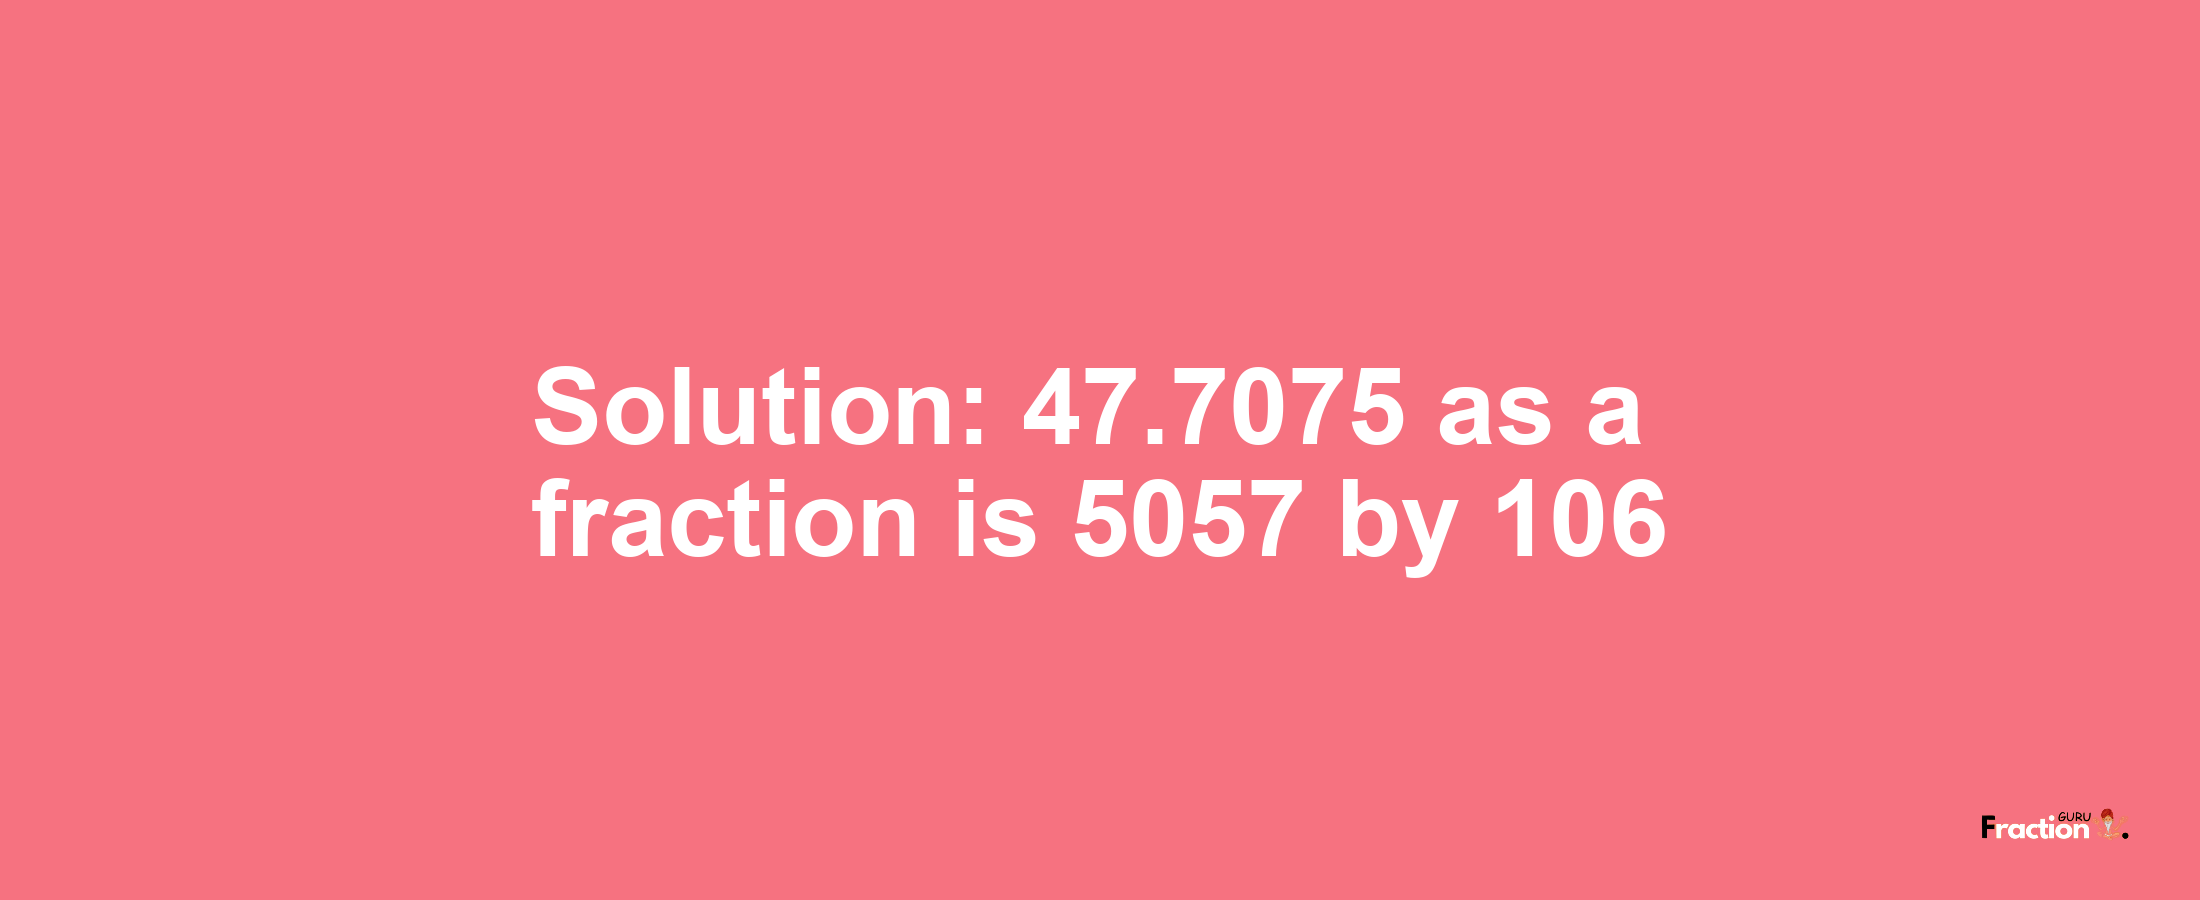 Solution:47.7075 as a fraction is 5057/106